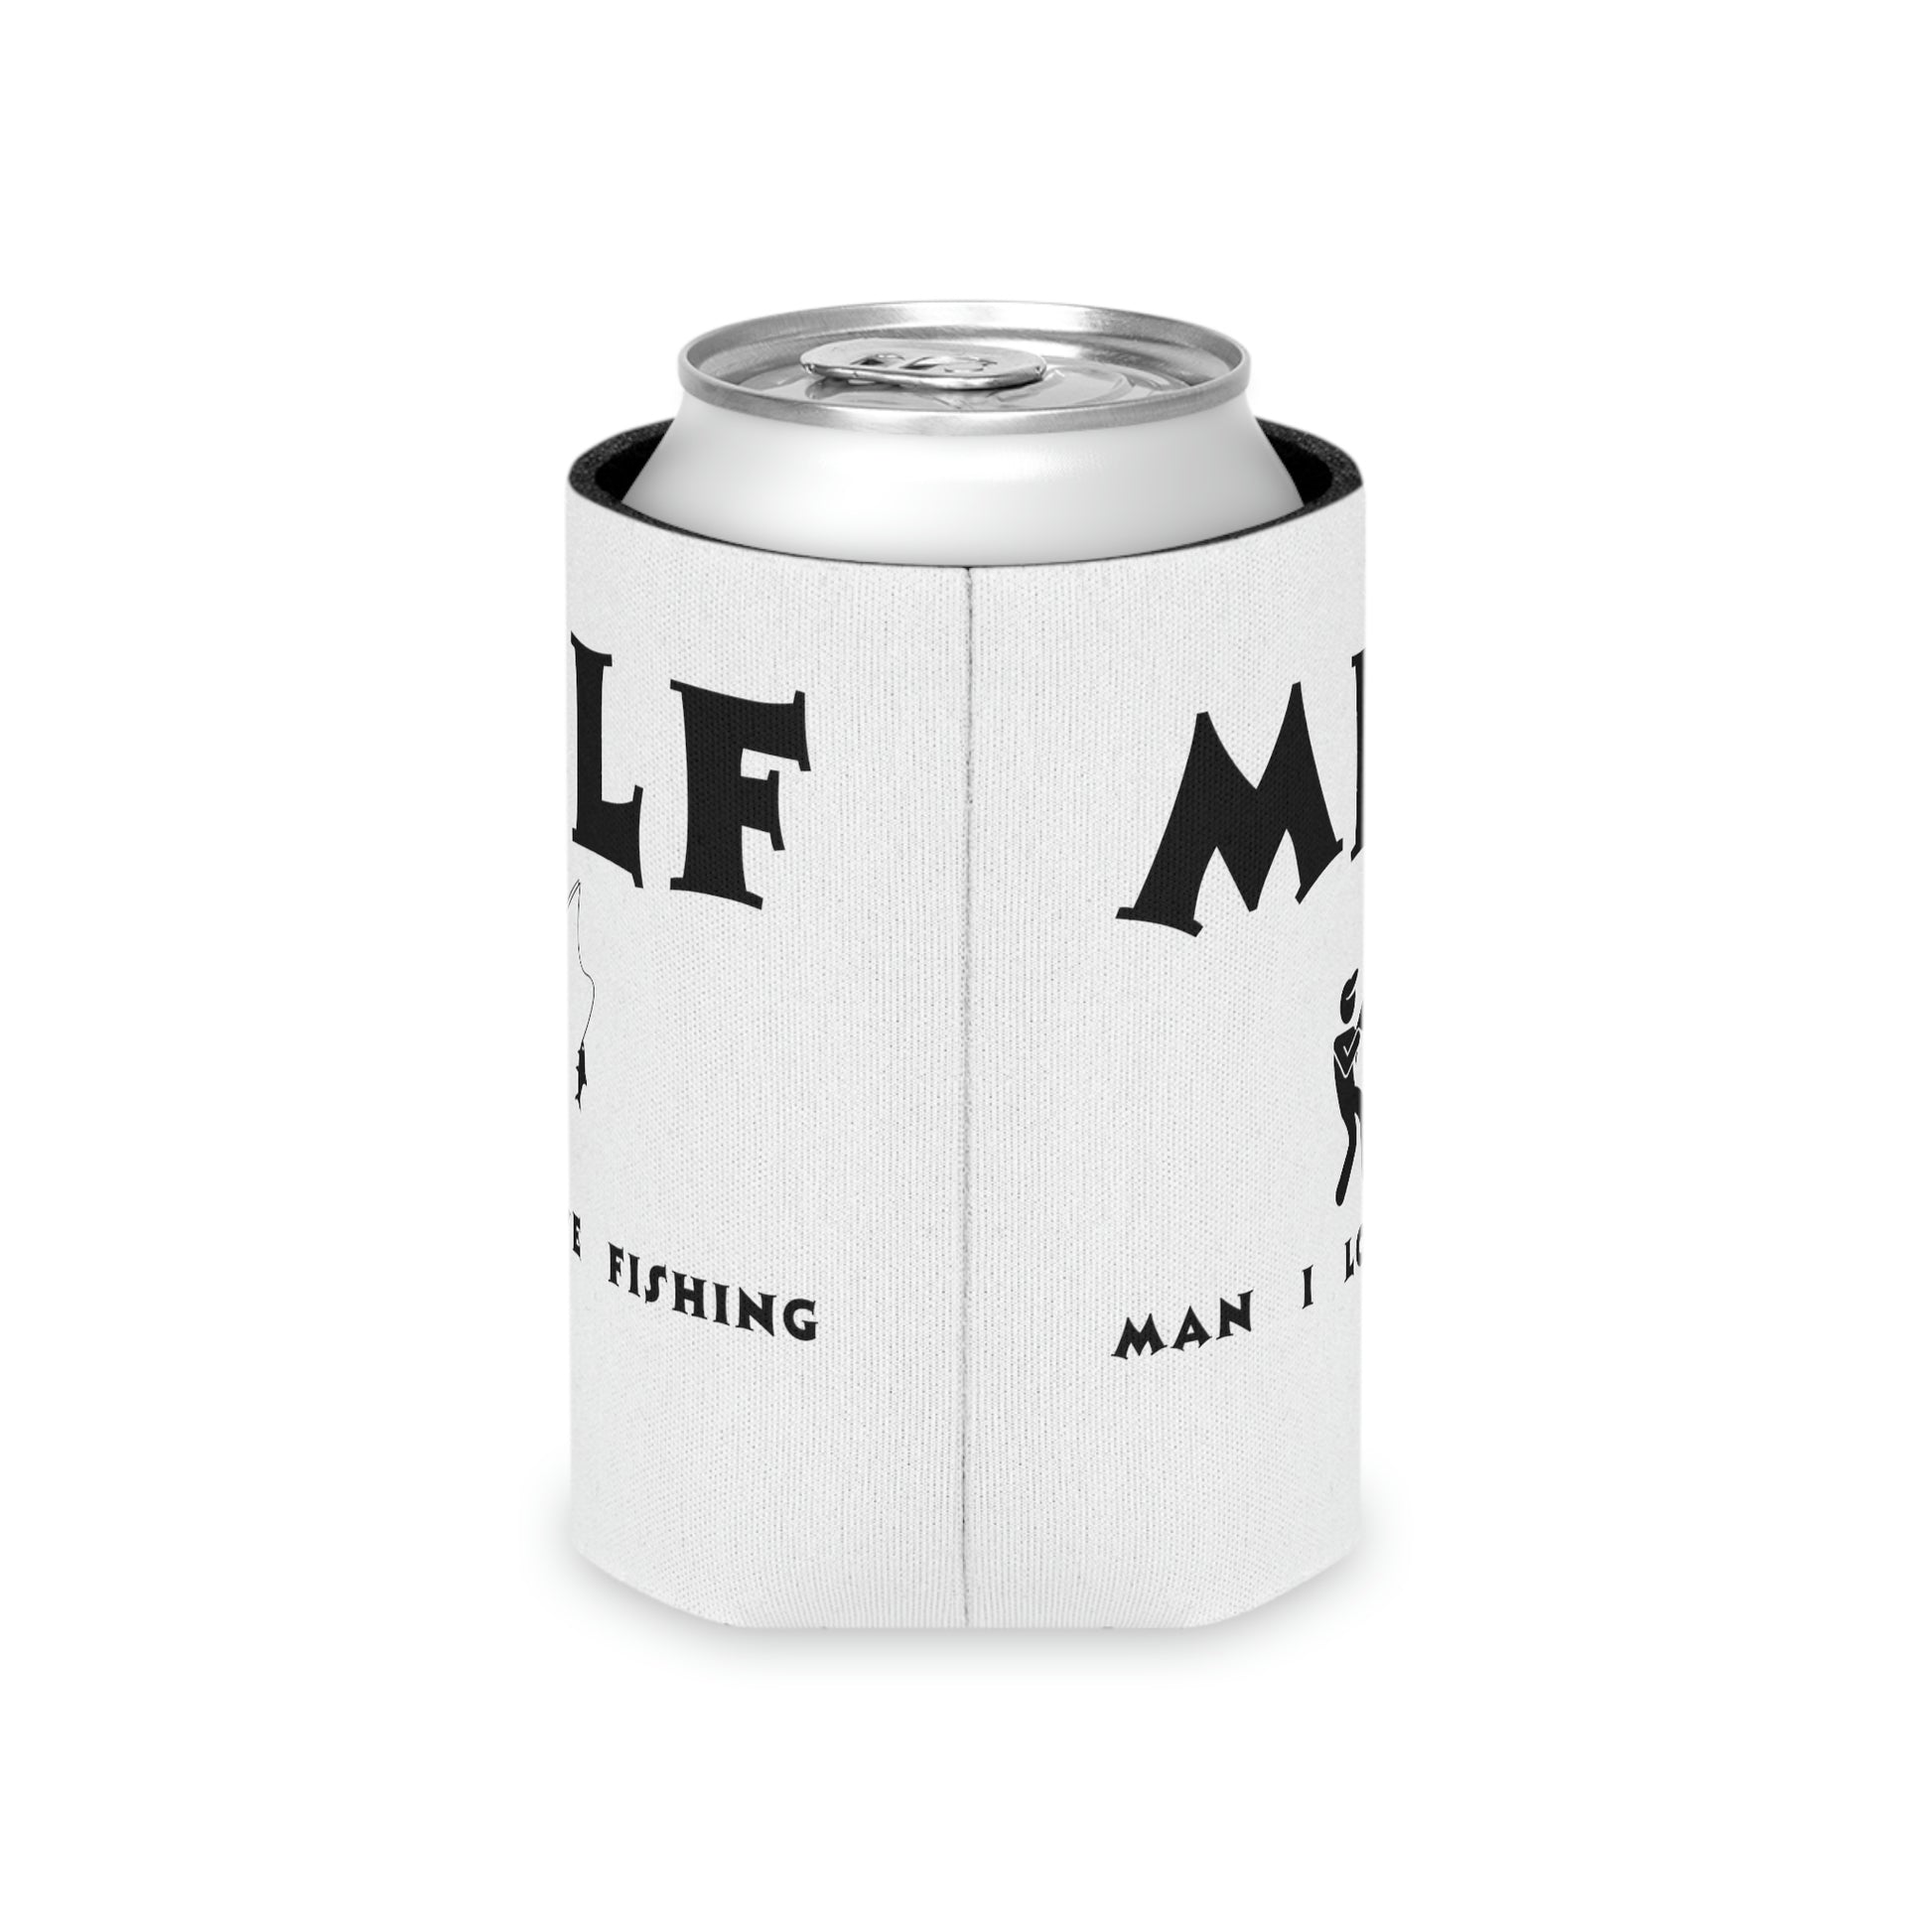 "MILF Man I Love Fishing" Can Cooler - Weave Got Gifts - Unique Gifts You Won’t Find Anywhere Else!